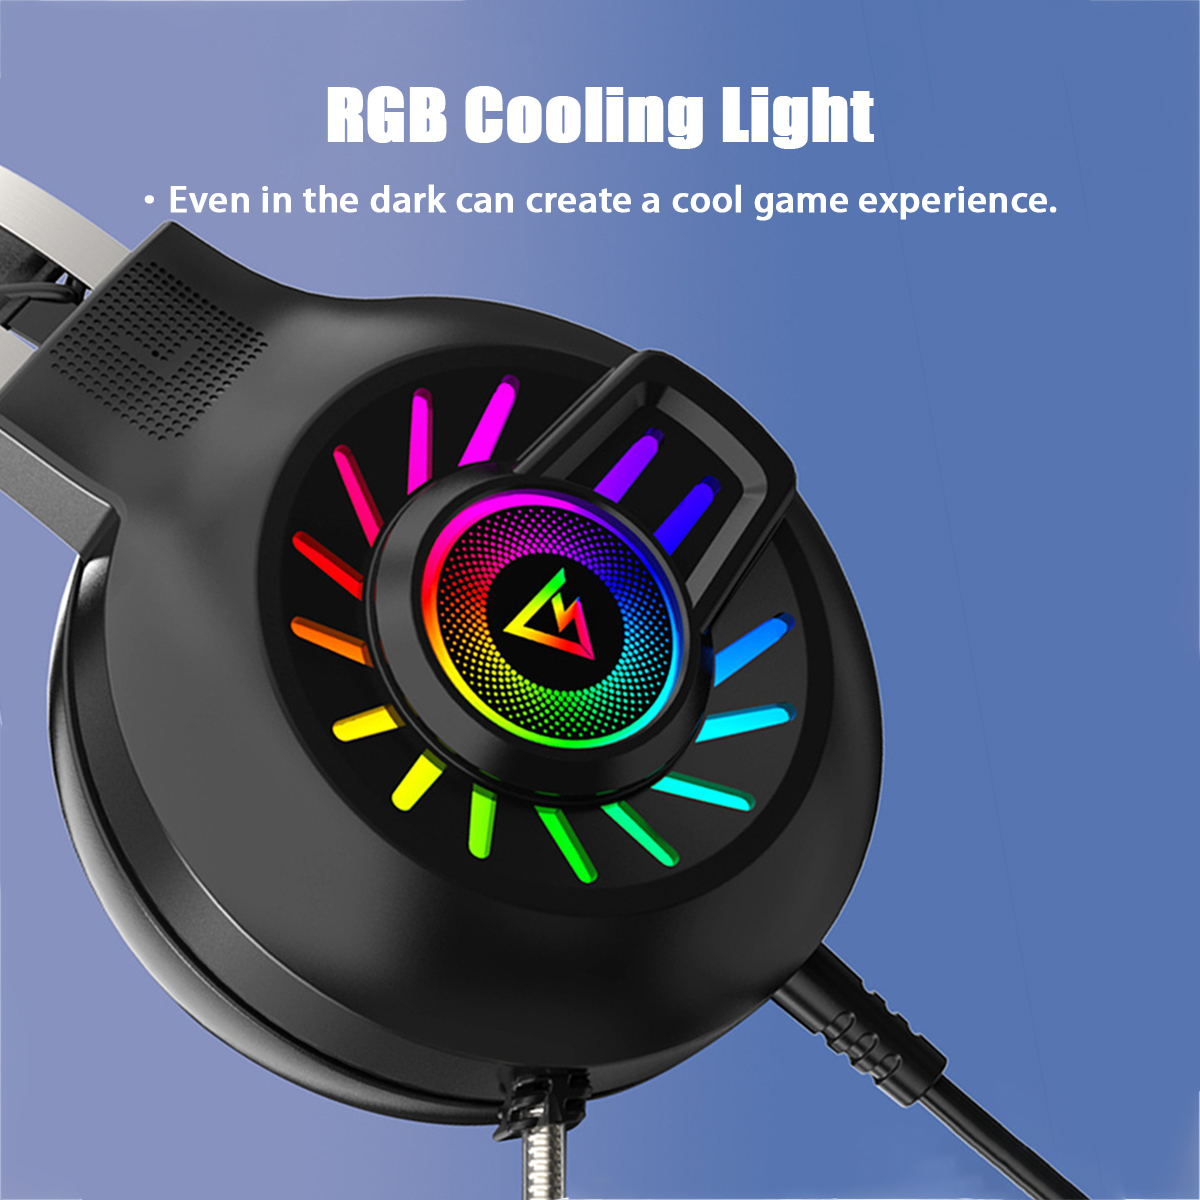 Bakeey-M10-Gaming-Headset-50mm-Drivers-Noise-Reduction-RGB-Luminous-Head-Mounted-35mm-Gaming-Headpho-1805656-6